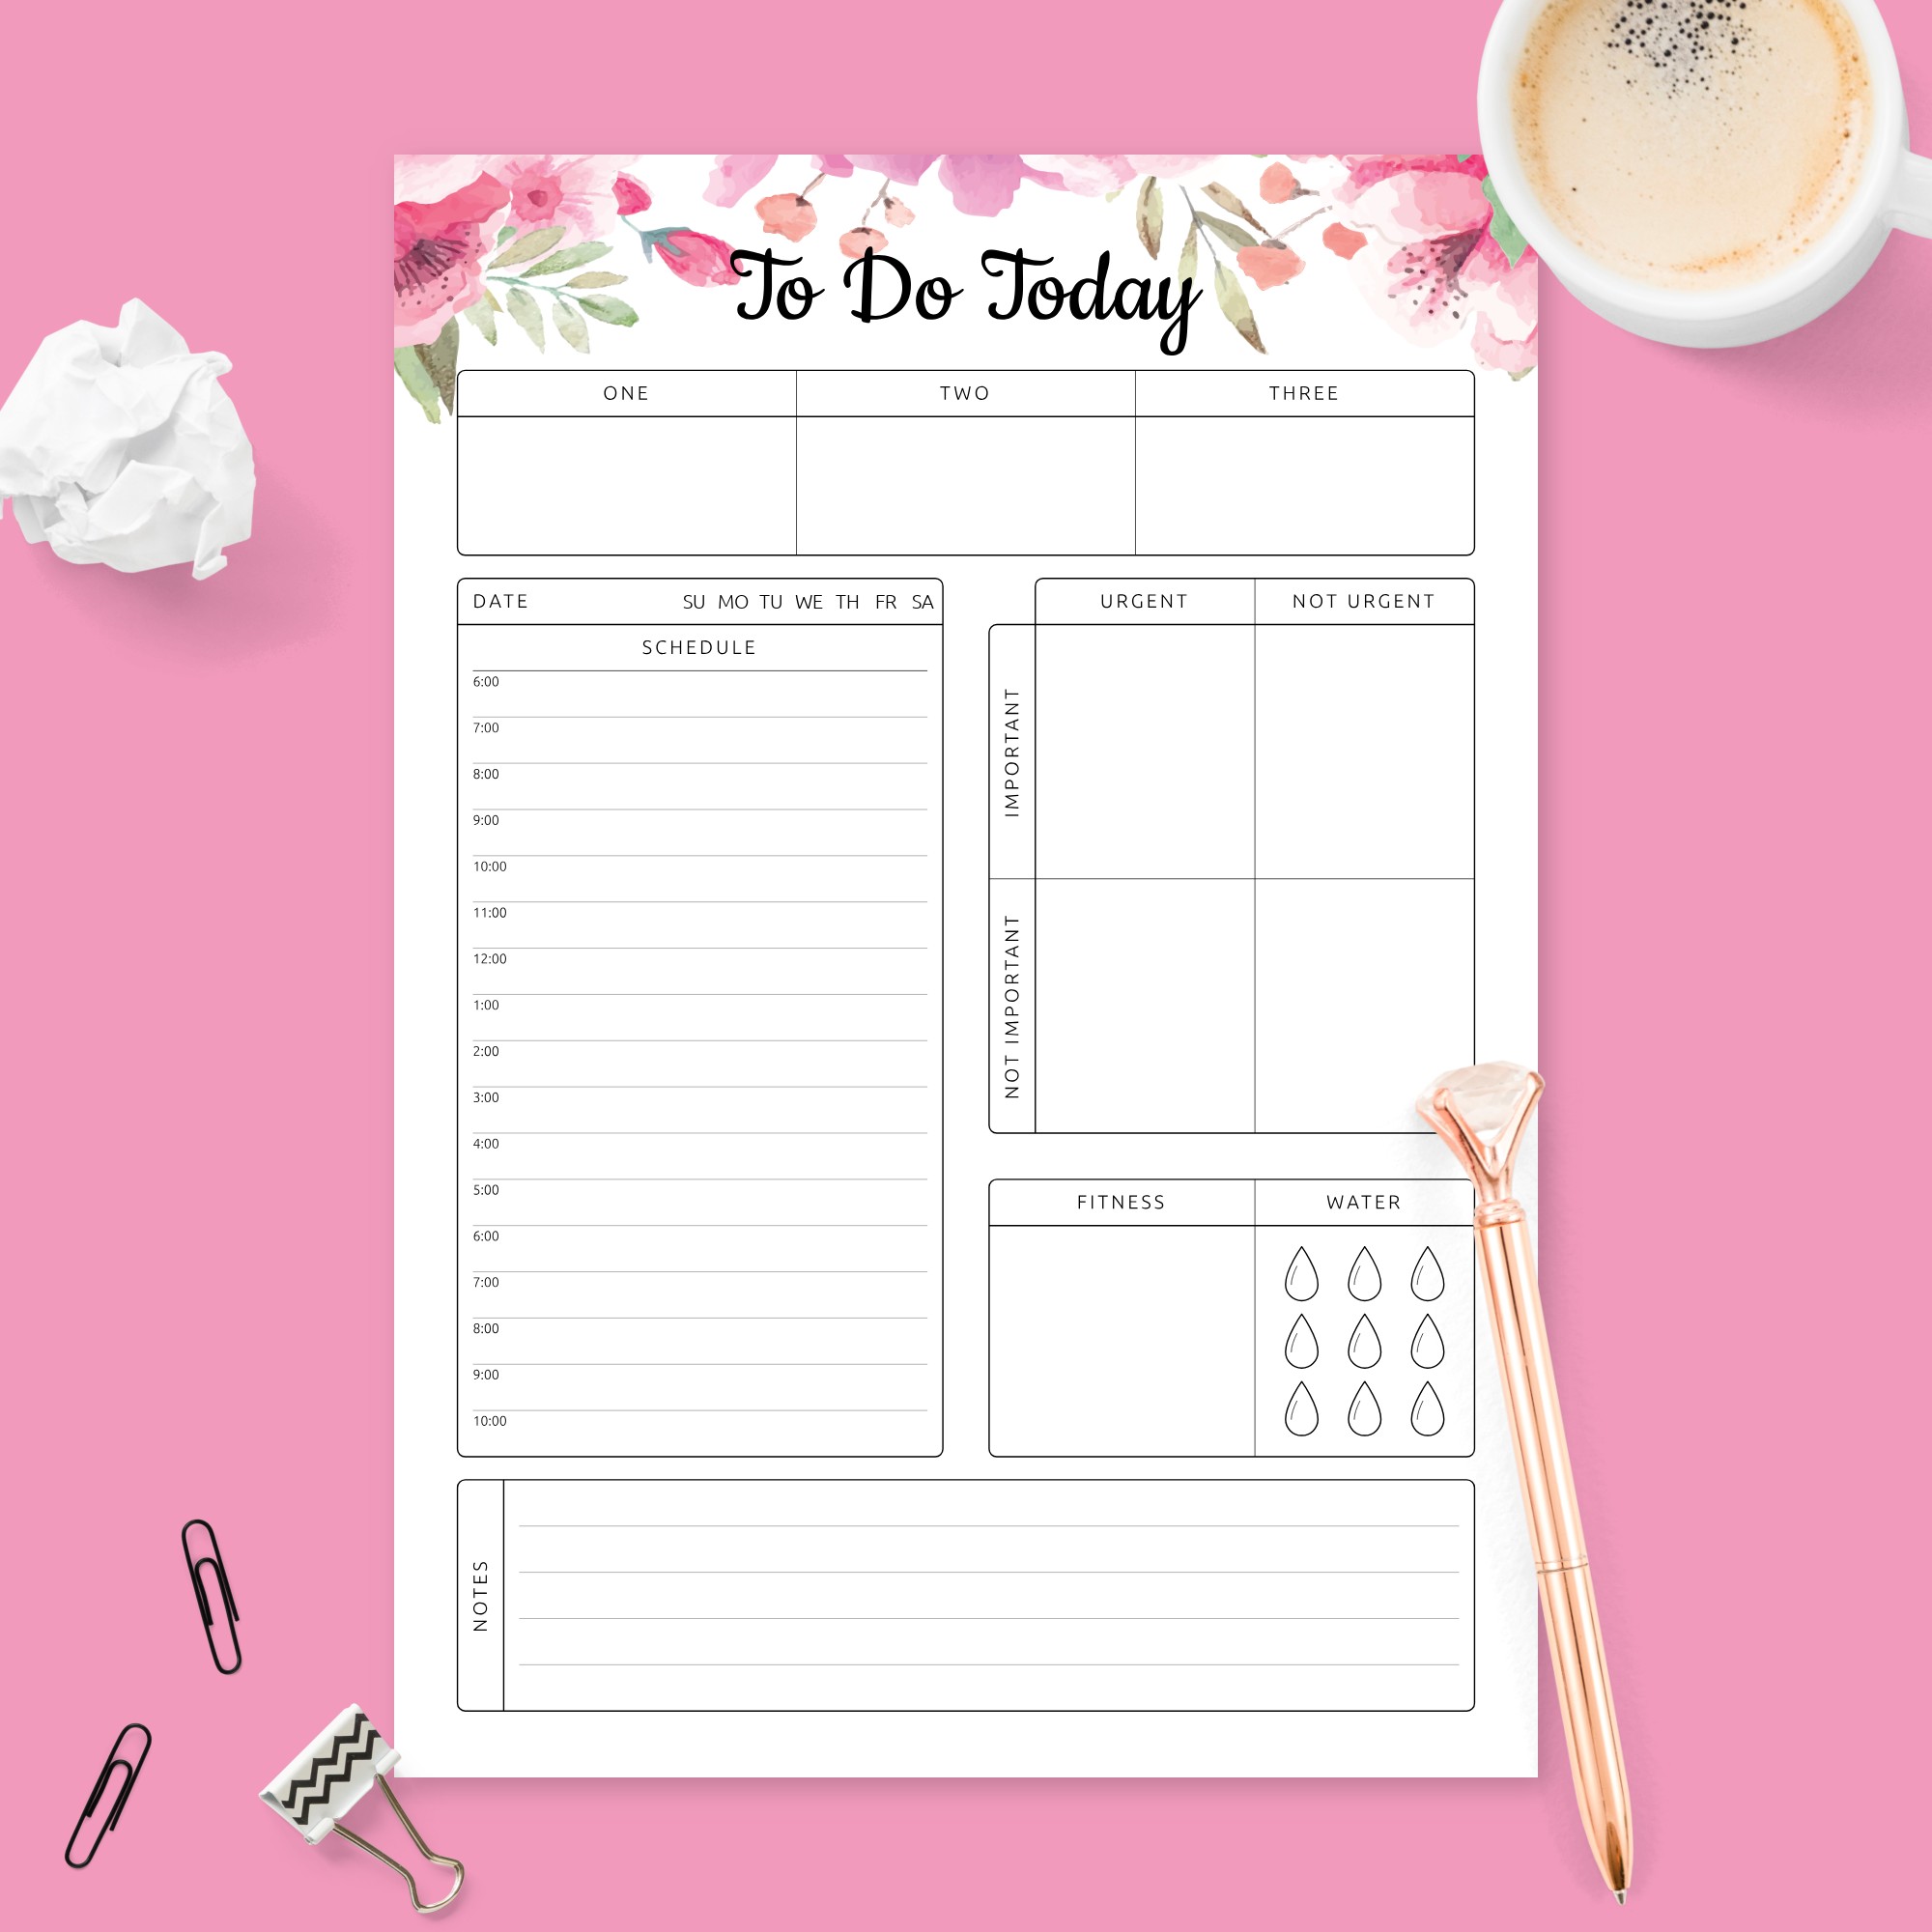 downloadable daily schedule planner